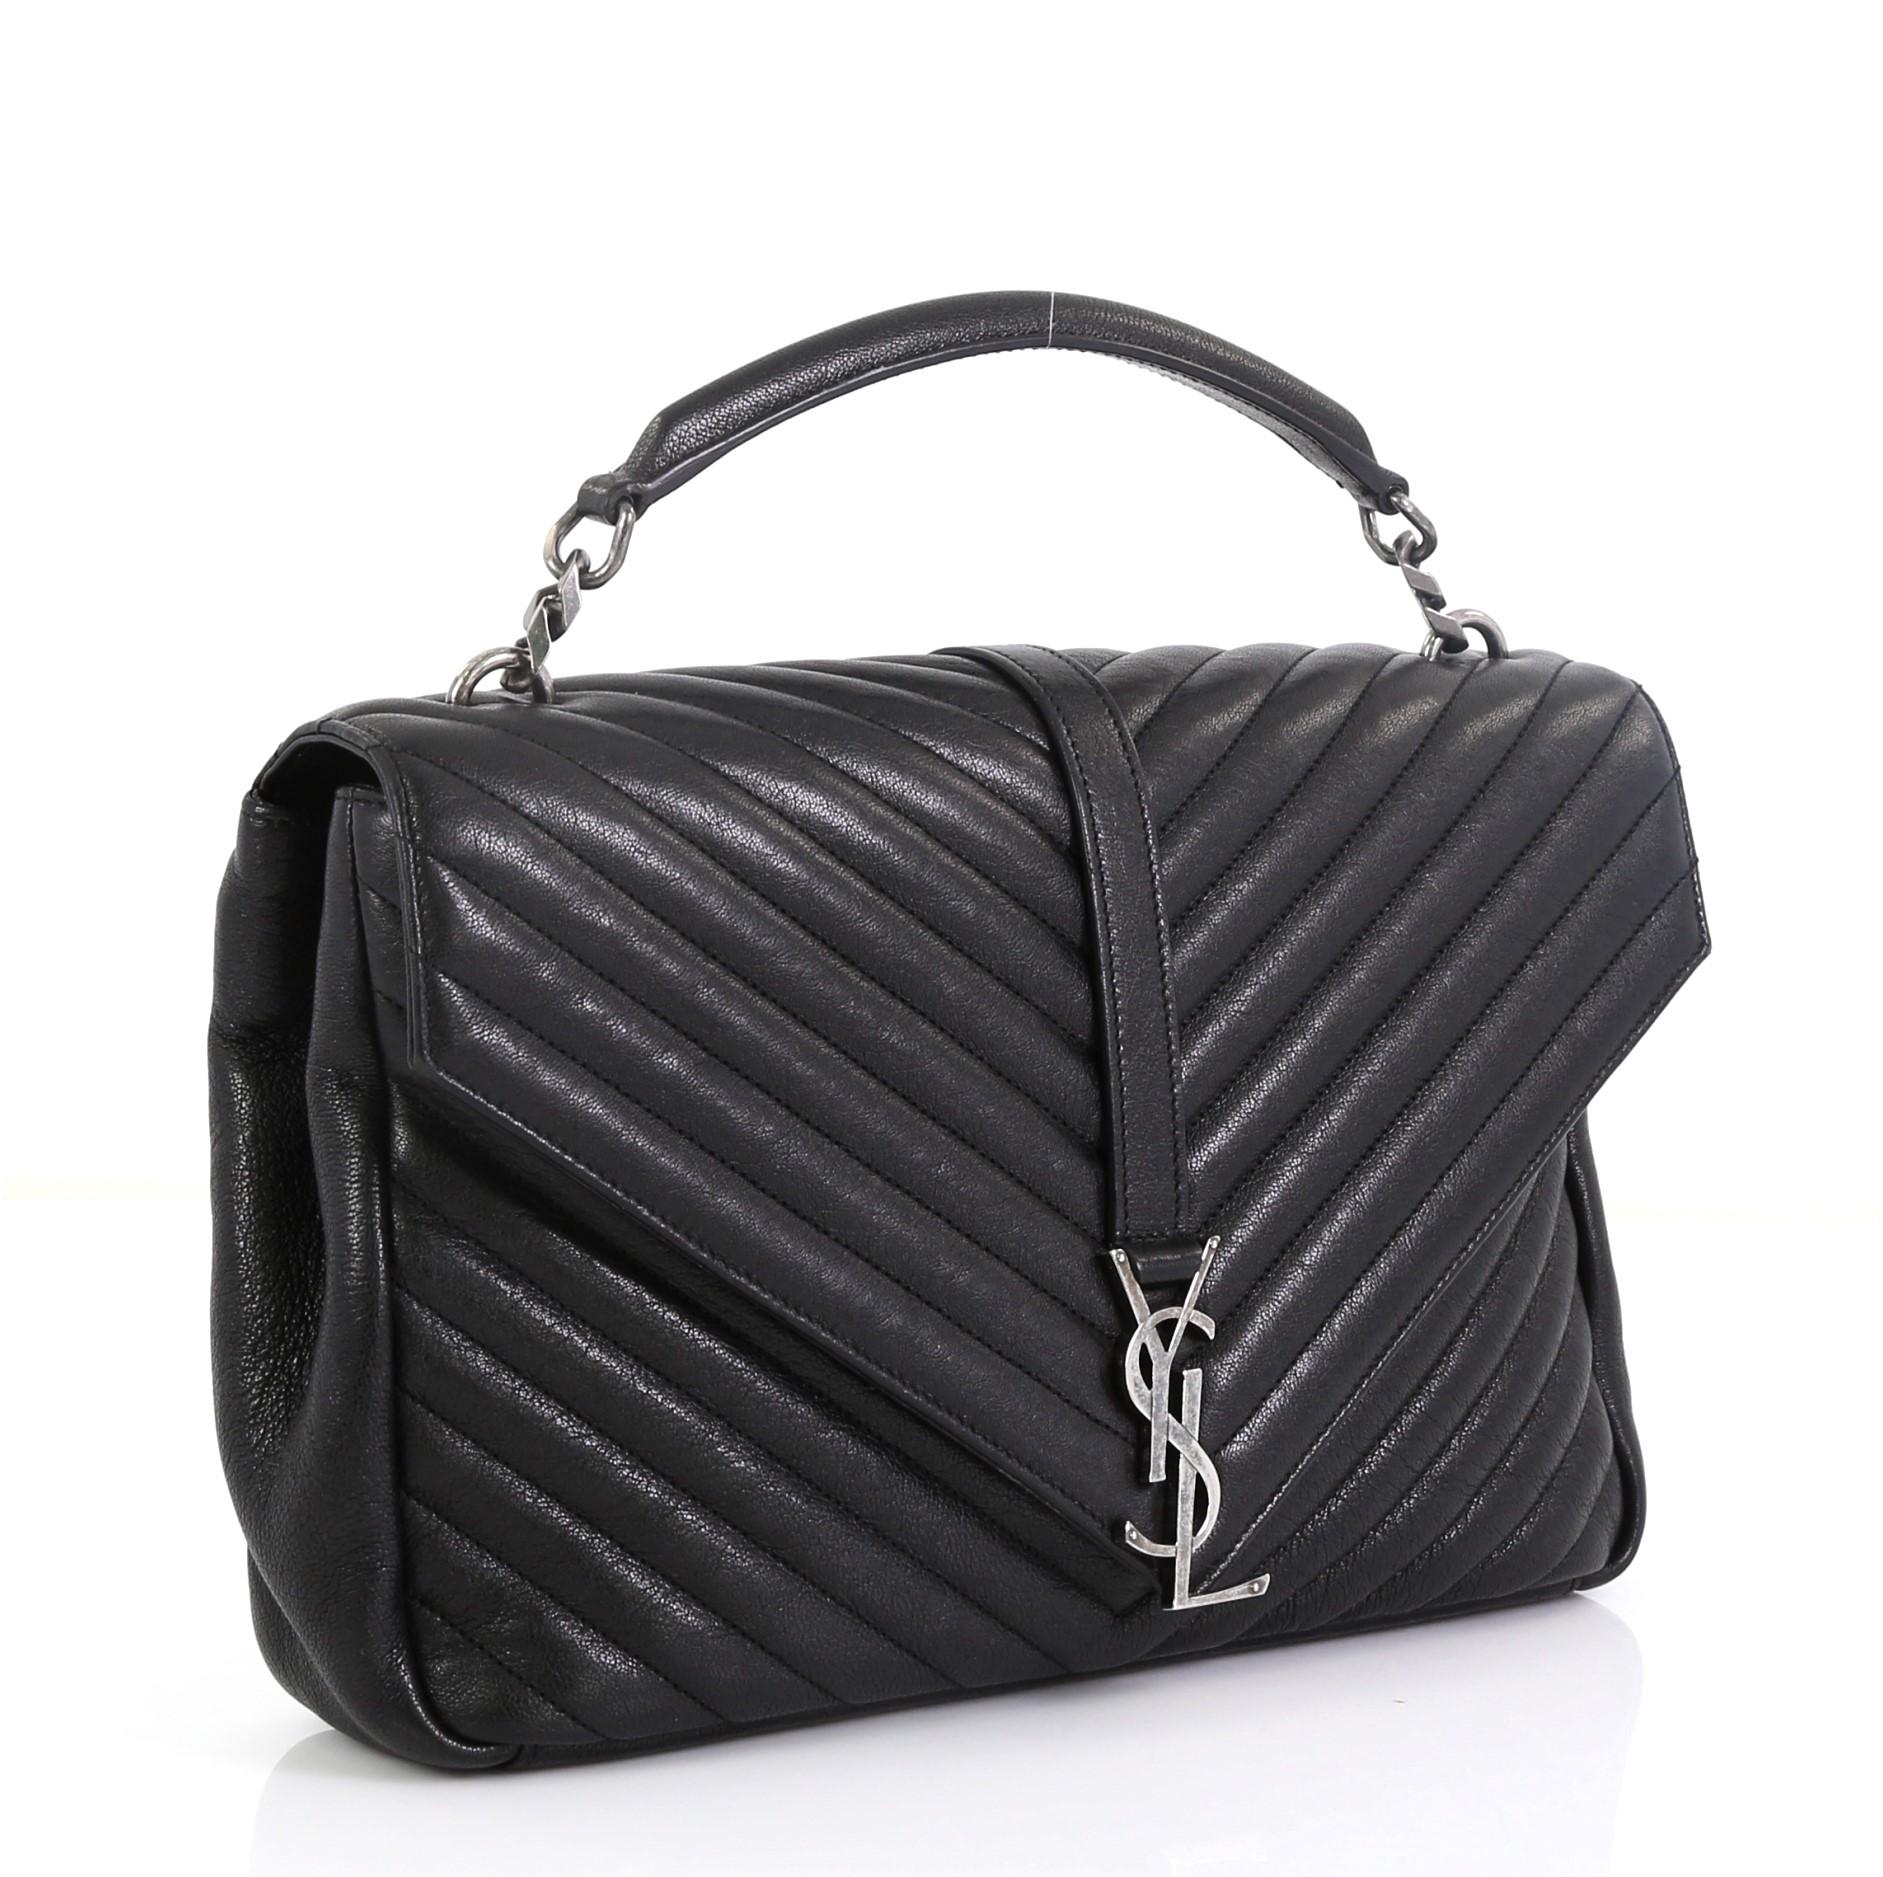 This Saint Laurent Classic Monogram College Bag Matelasse Chevron Leather Large, crafted in black matelasse chevron leather, features a single top handle, exterior back pocket, and aged silver-tone hardware. Its magnetic snap closure opens to a